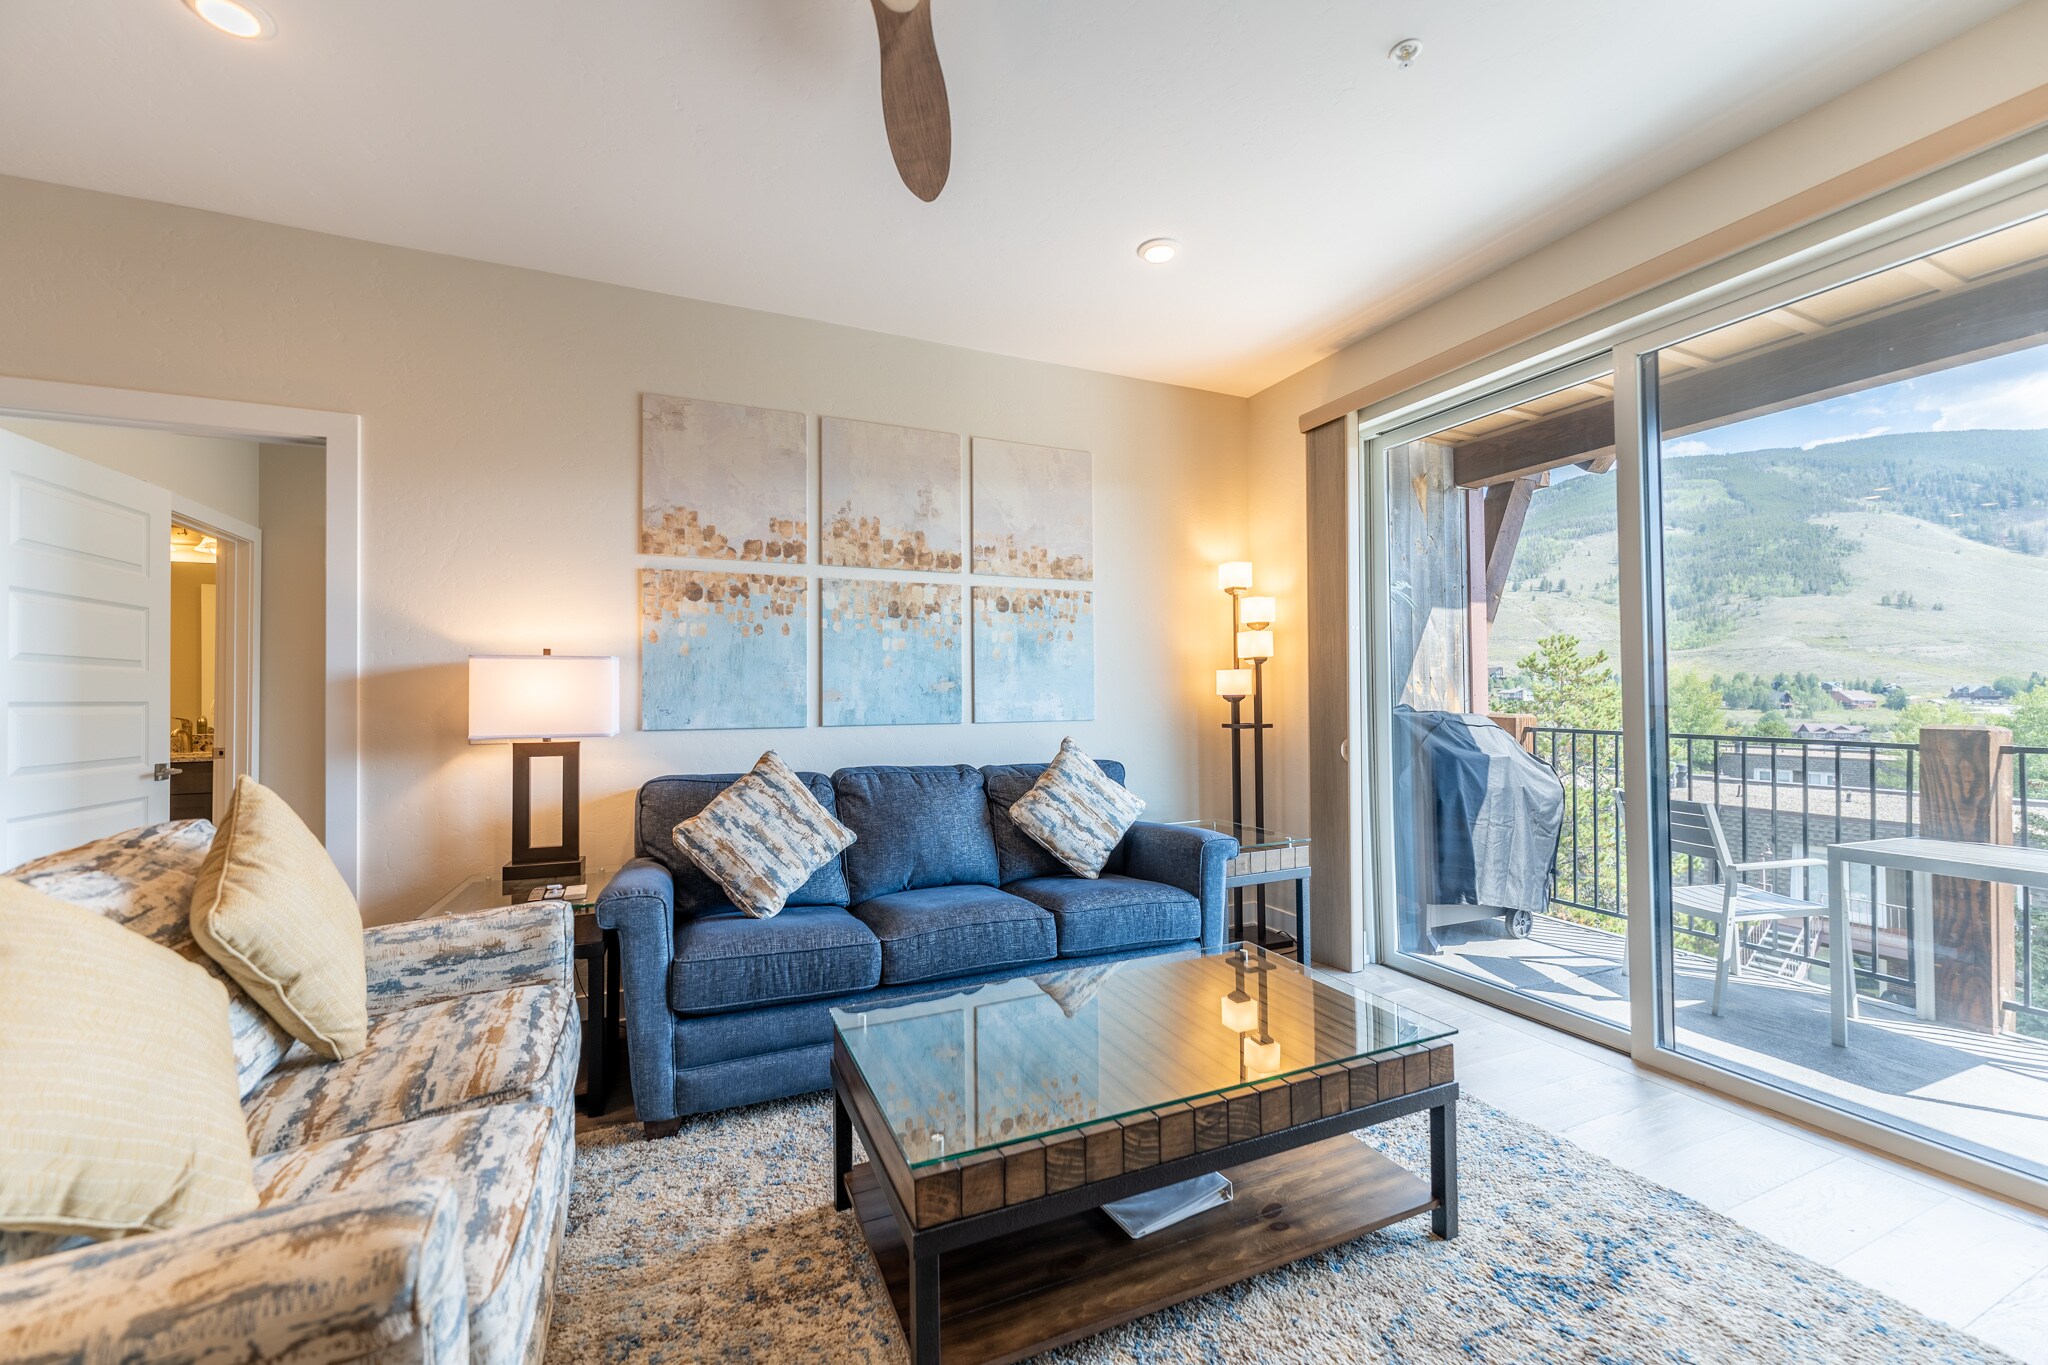 Living area featuring cozy furnishings, a gas fireplace, ceiling fan, and balcony access. 